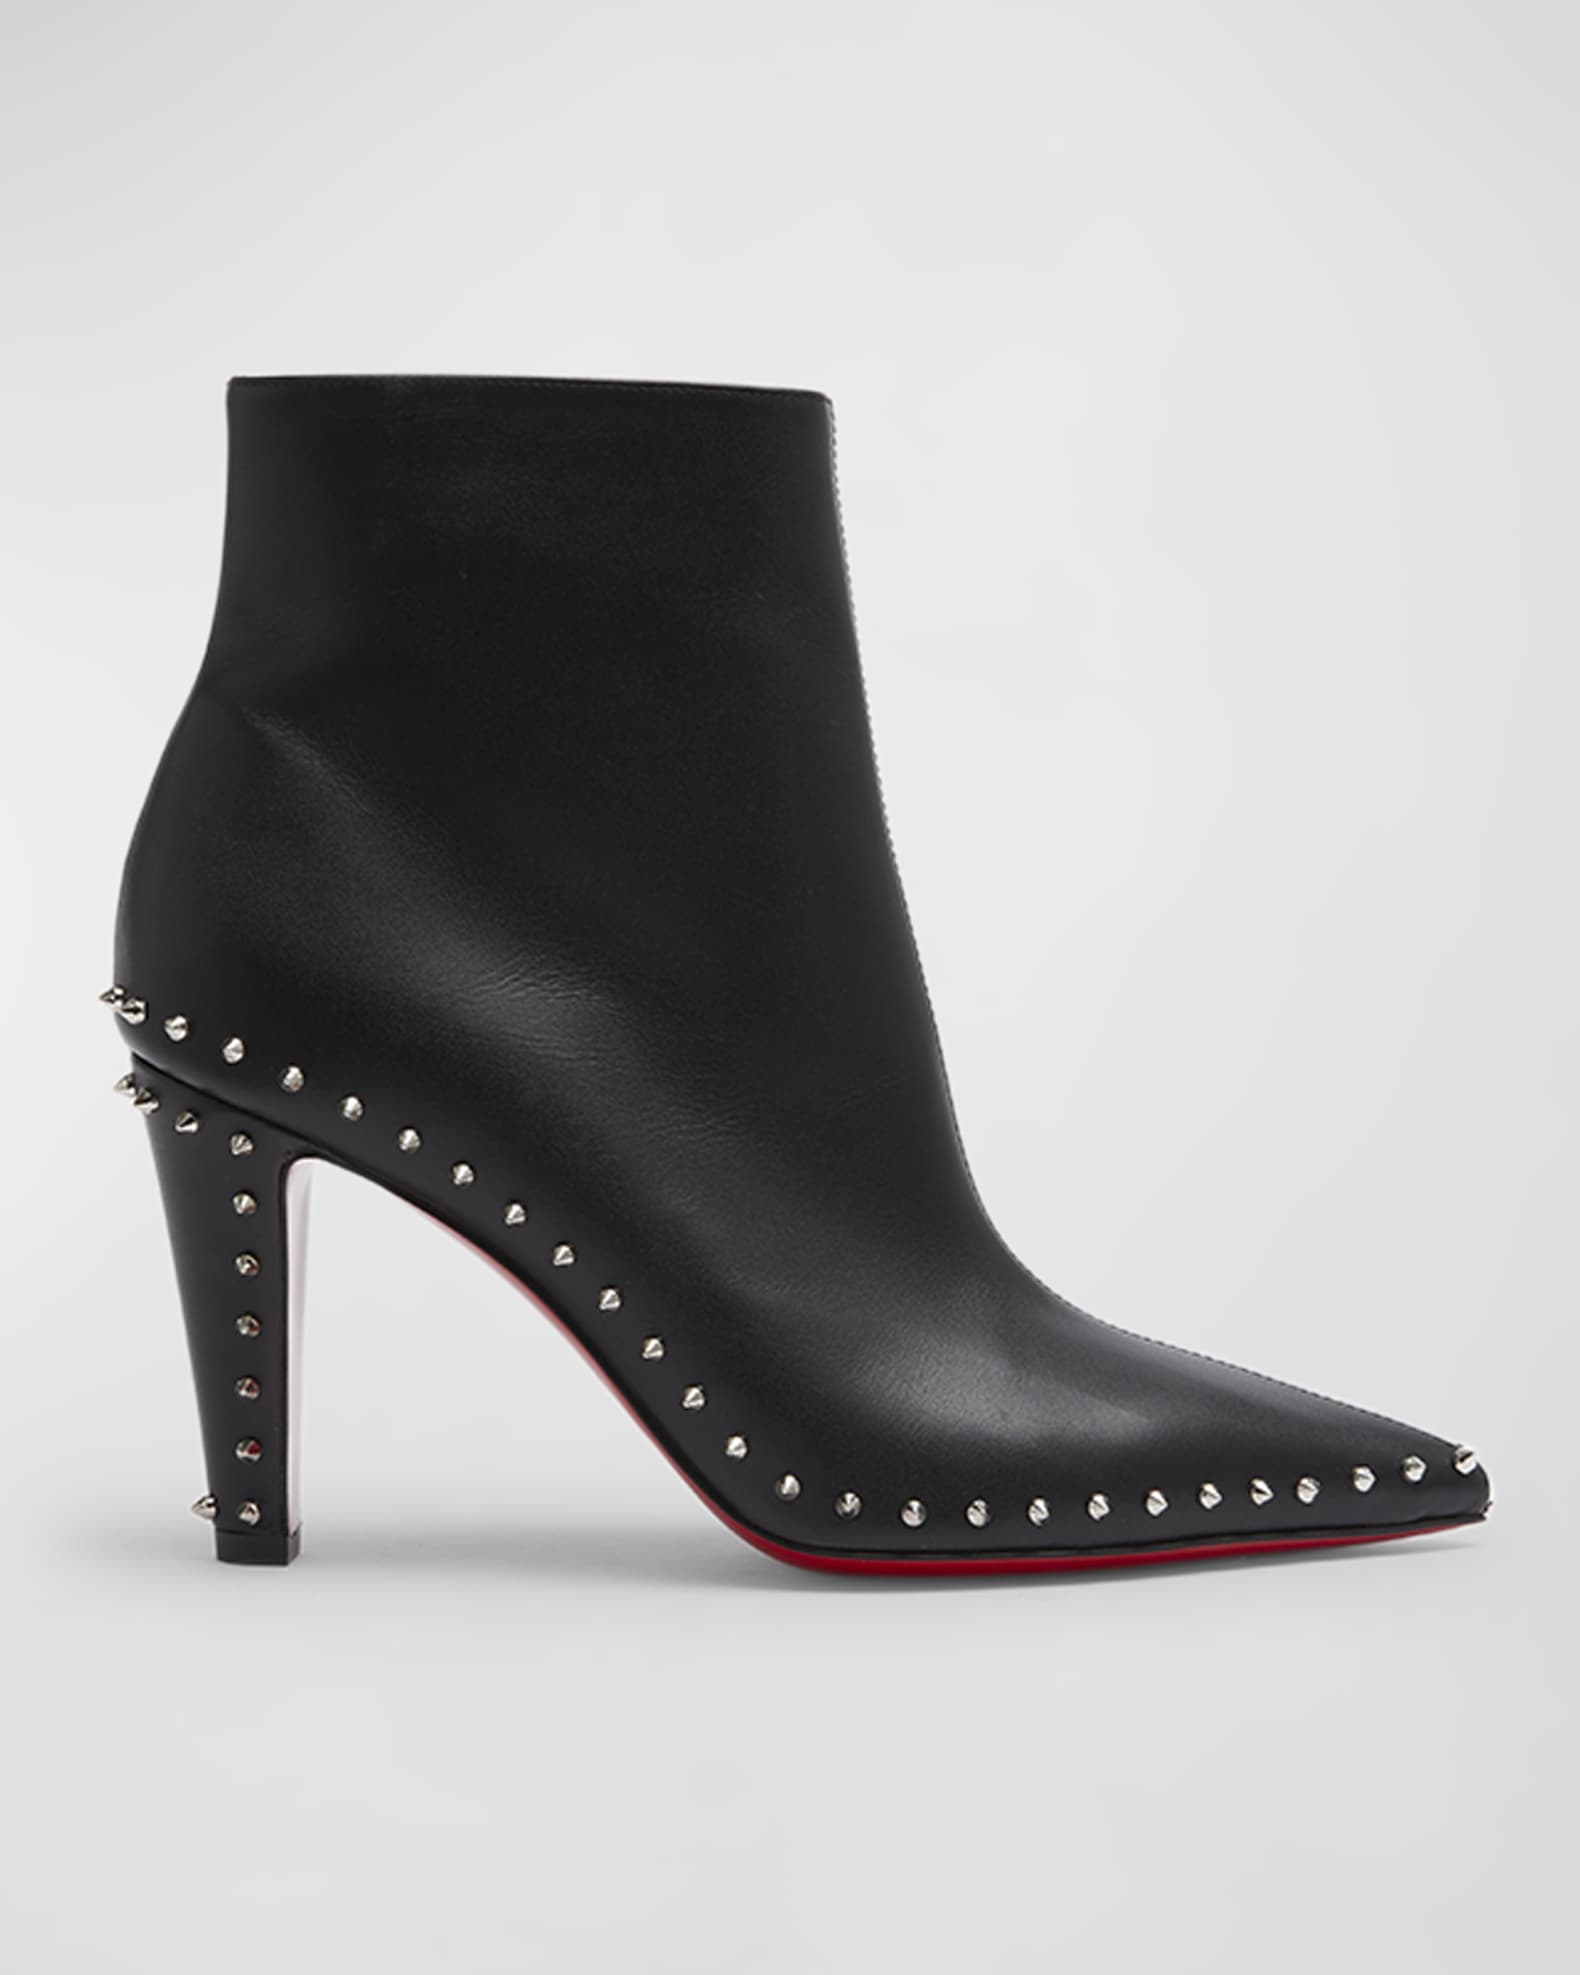 Christian Louboutin, Willeta 100 spiked suede ankle boots